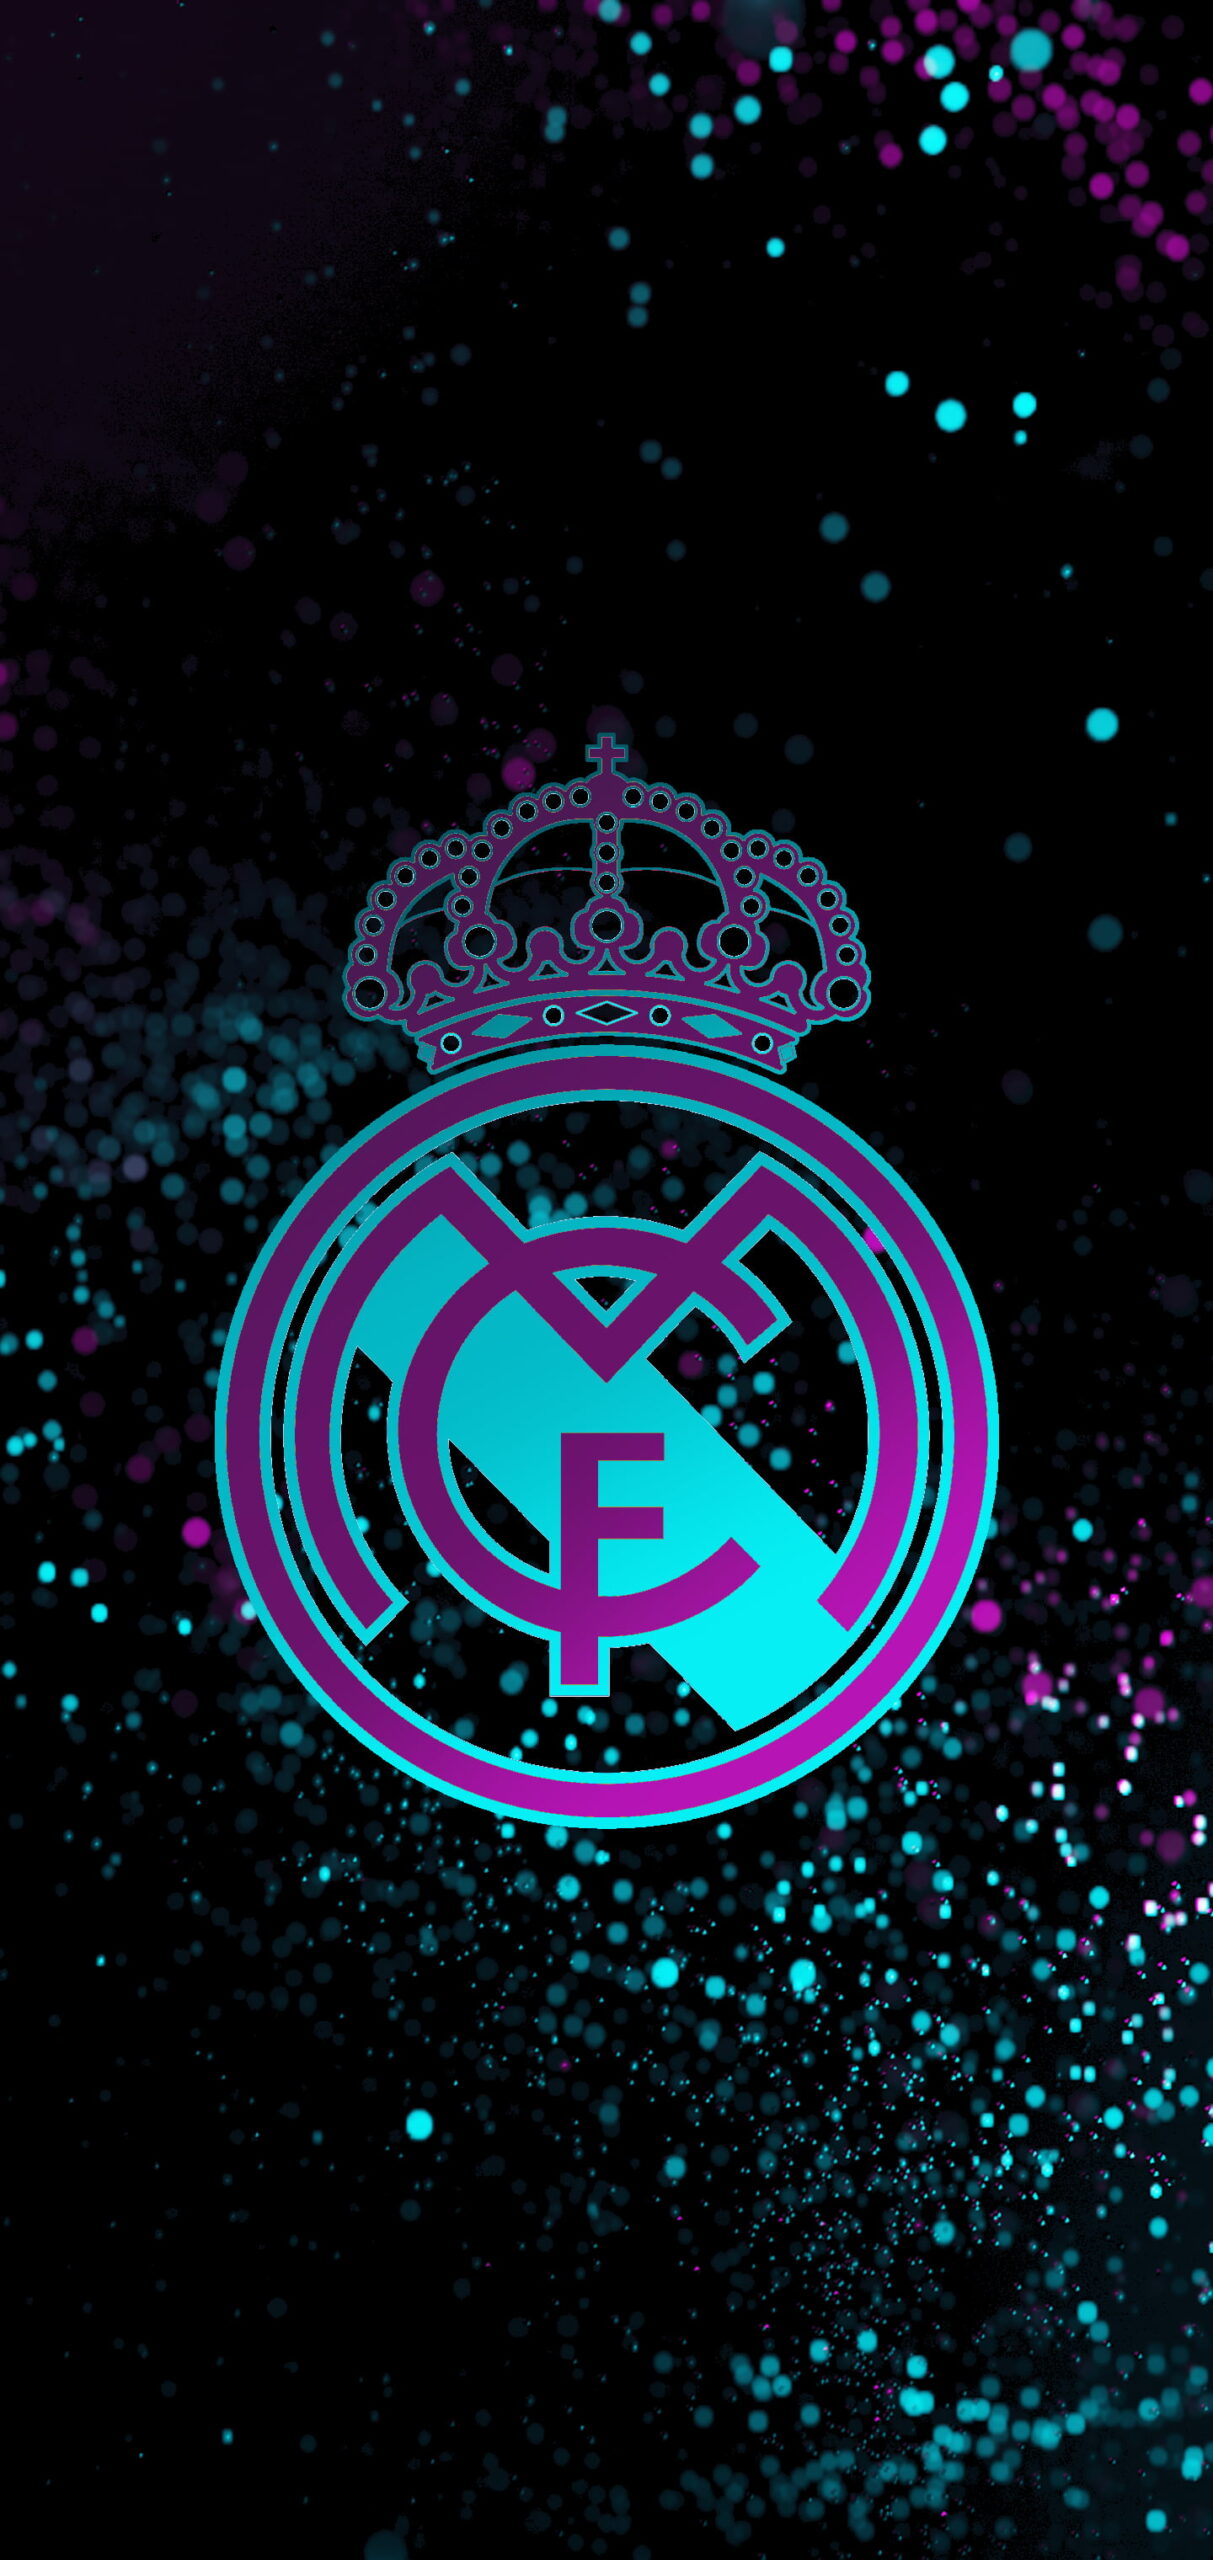 Real Madrid, Real Madrid 4K - Football Elegance Real Madrid's Exclusive 4K Wallpaper Collection